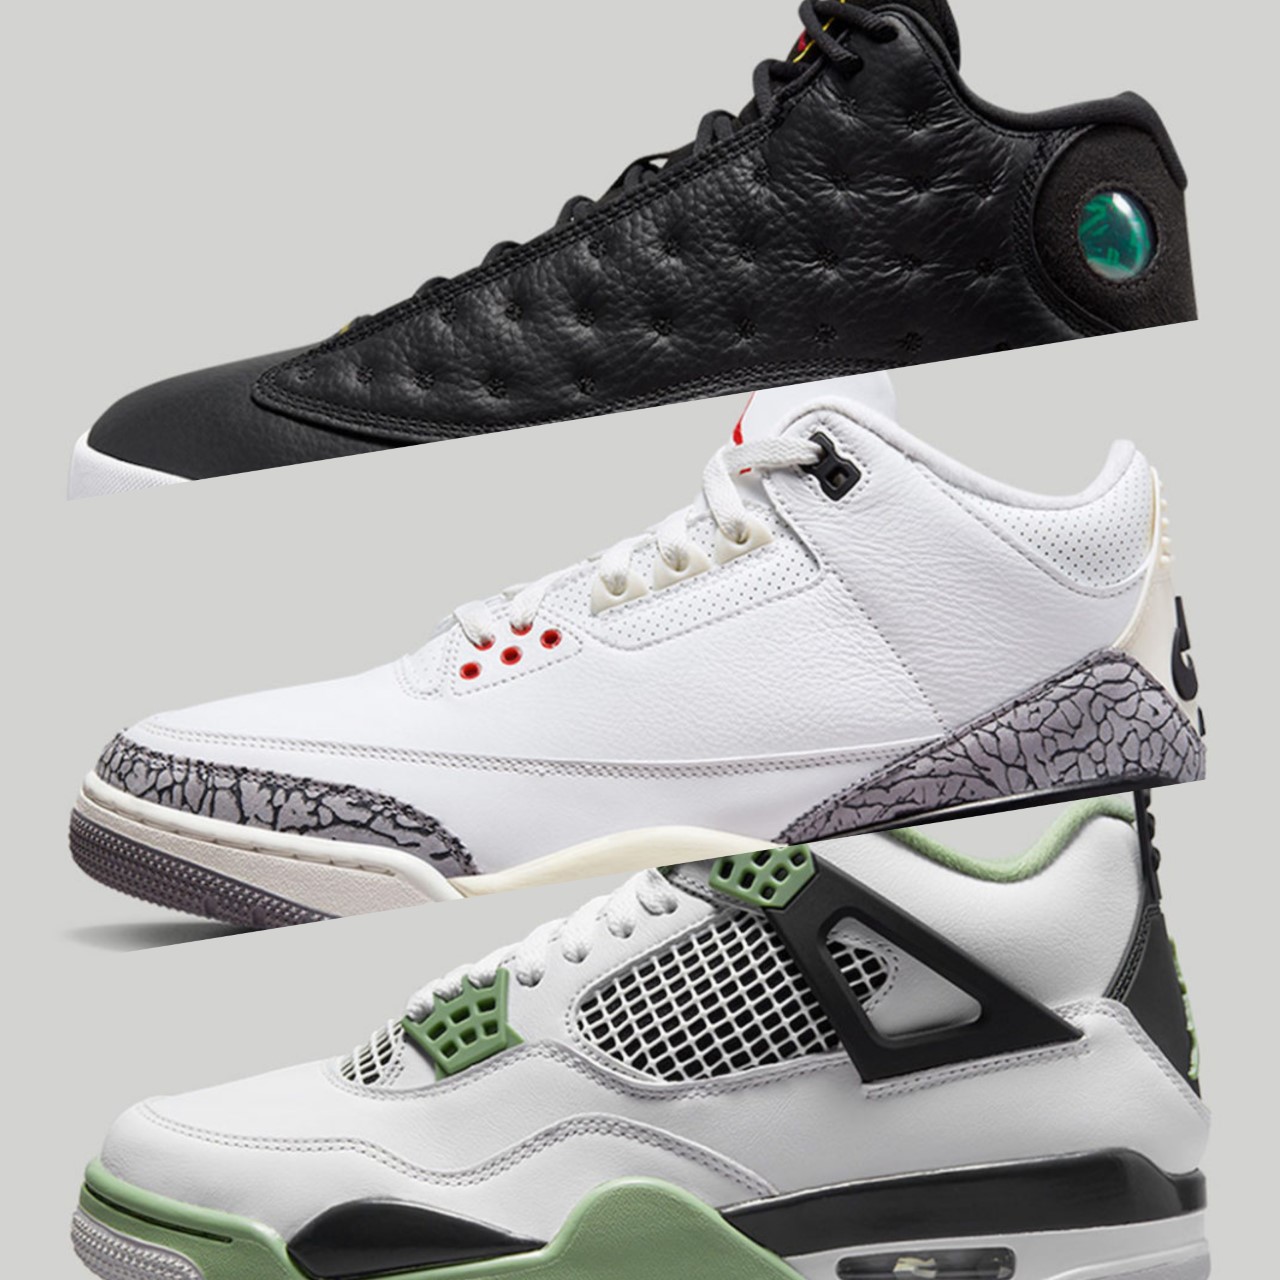 Jordan Brand Officially Reveals Select Spring 2023 Releases